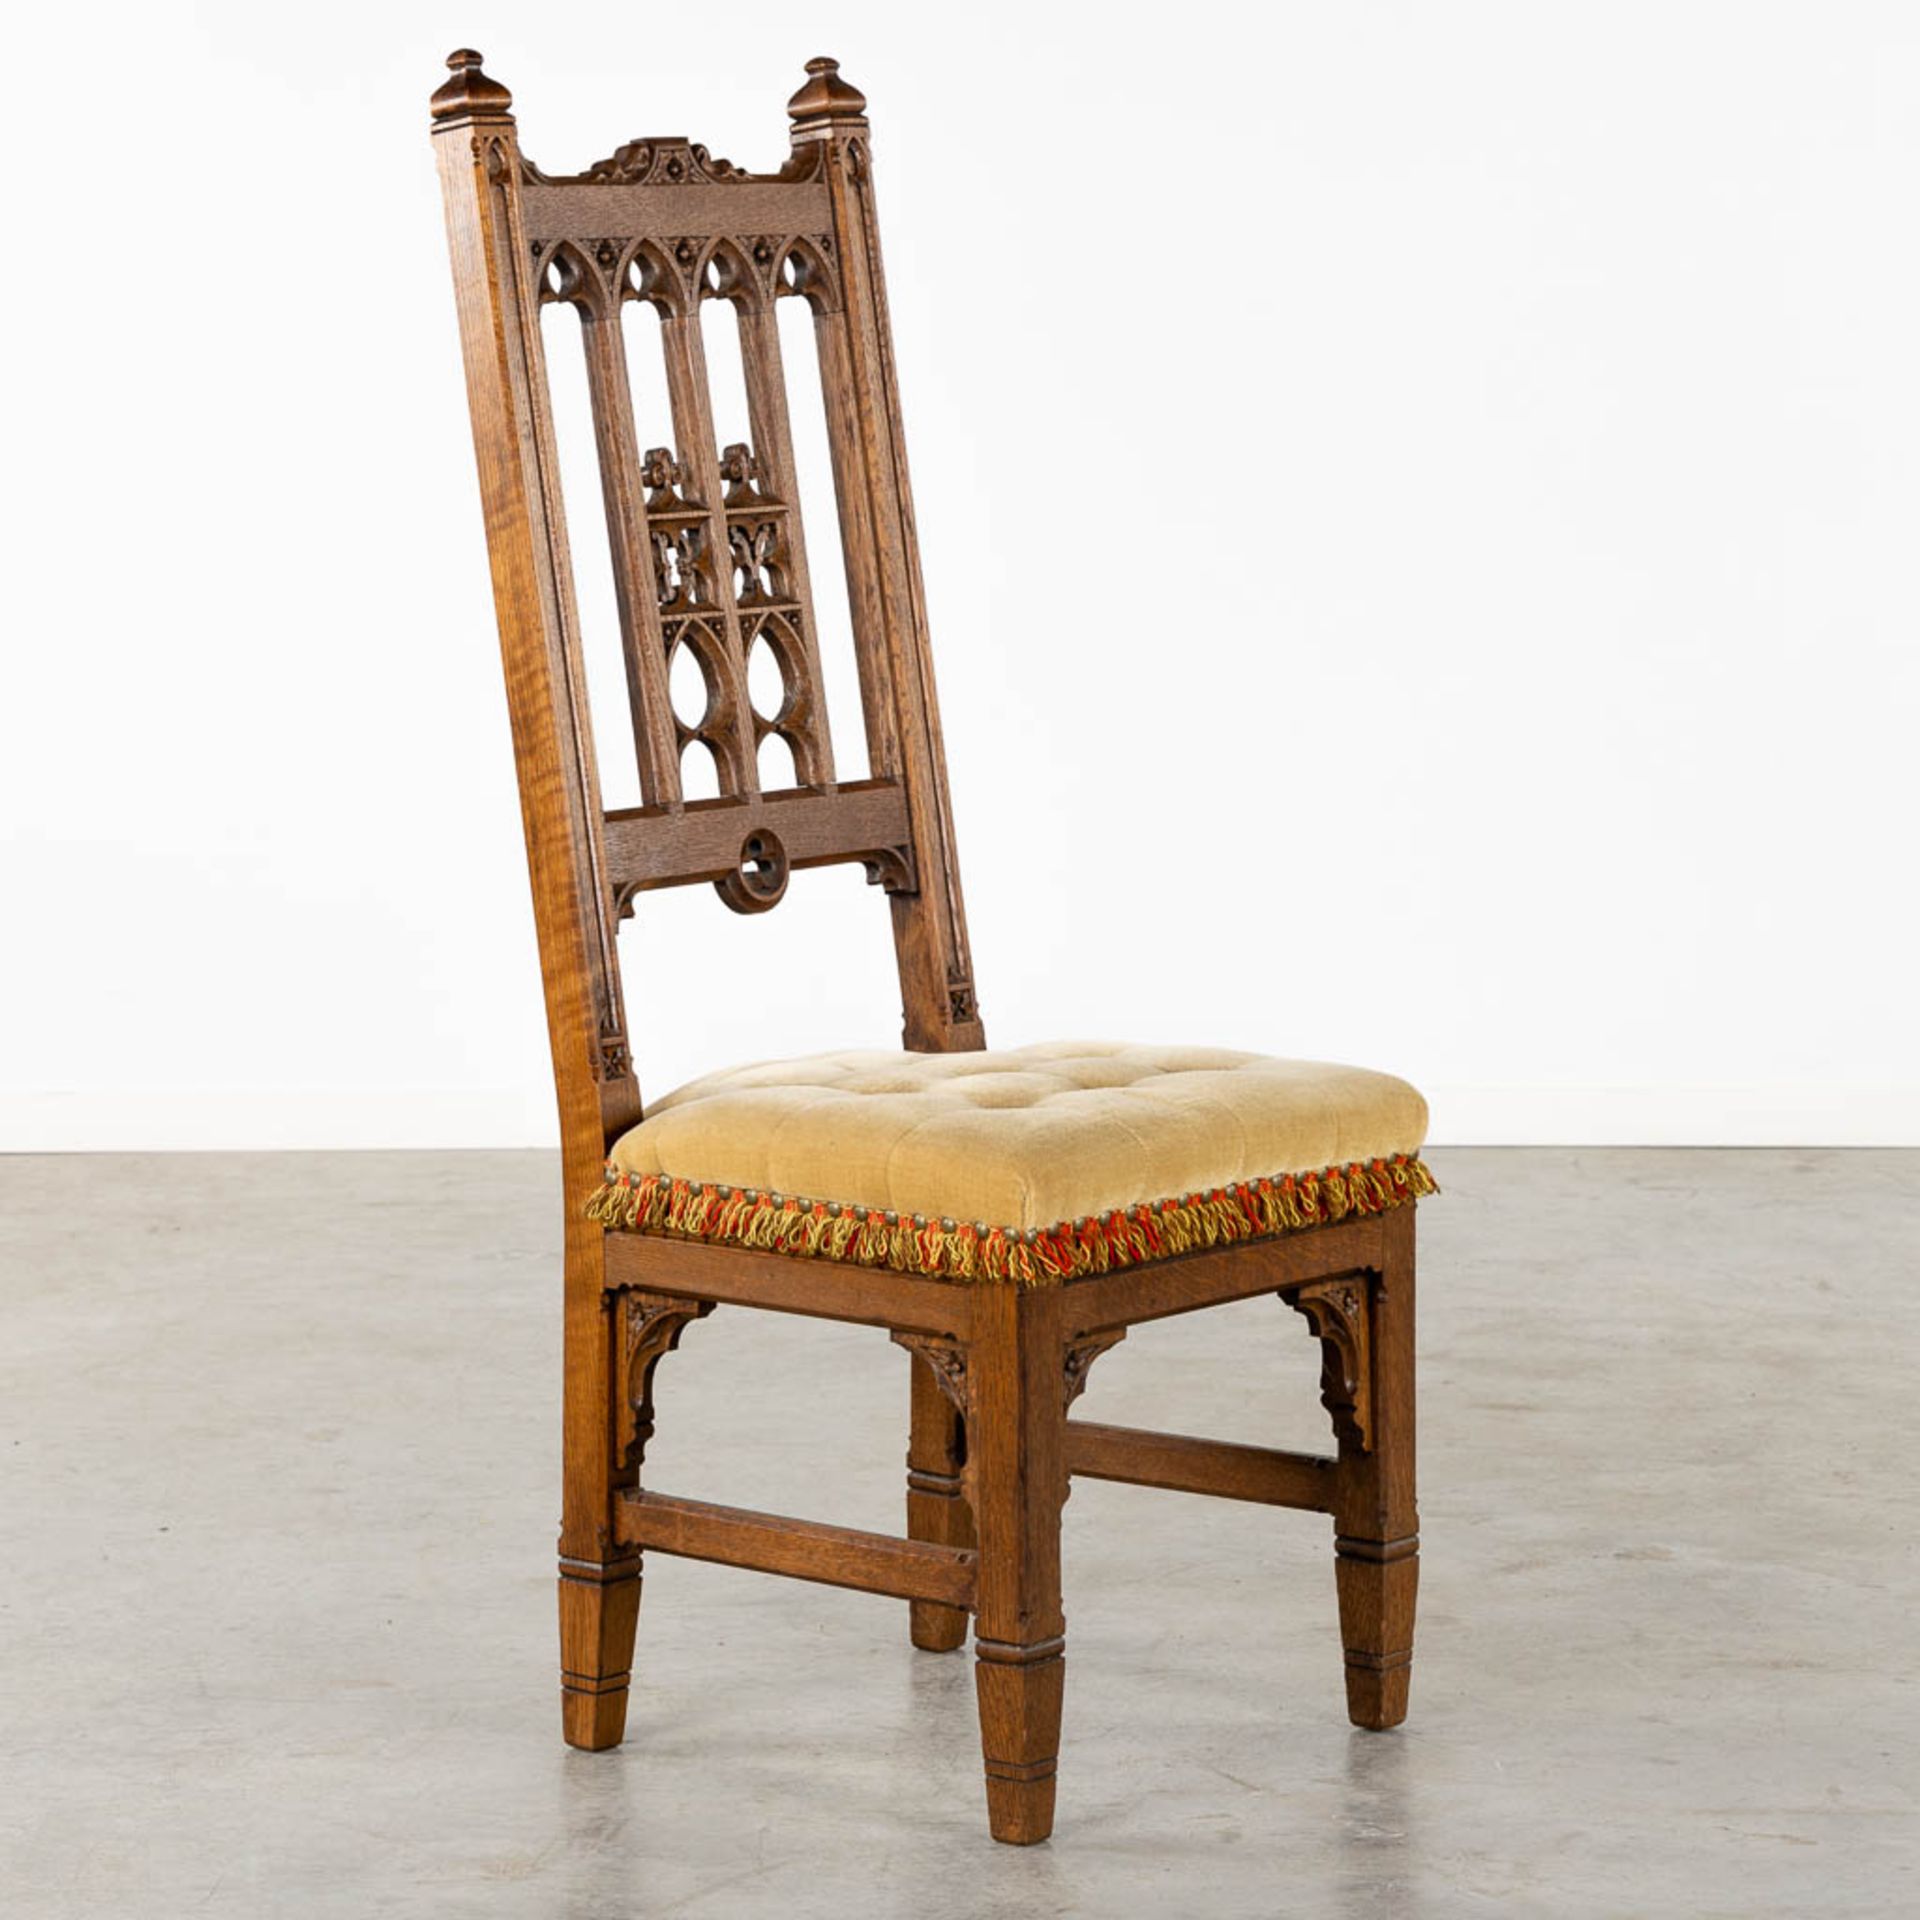 8 Gothic Revival style chairs, sculptured wood. Circa 1900. (L:54 x W:48 x H:123 cm) - Image 3 of 12